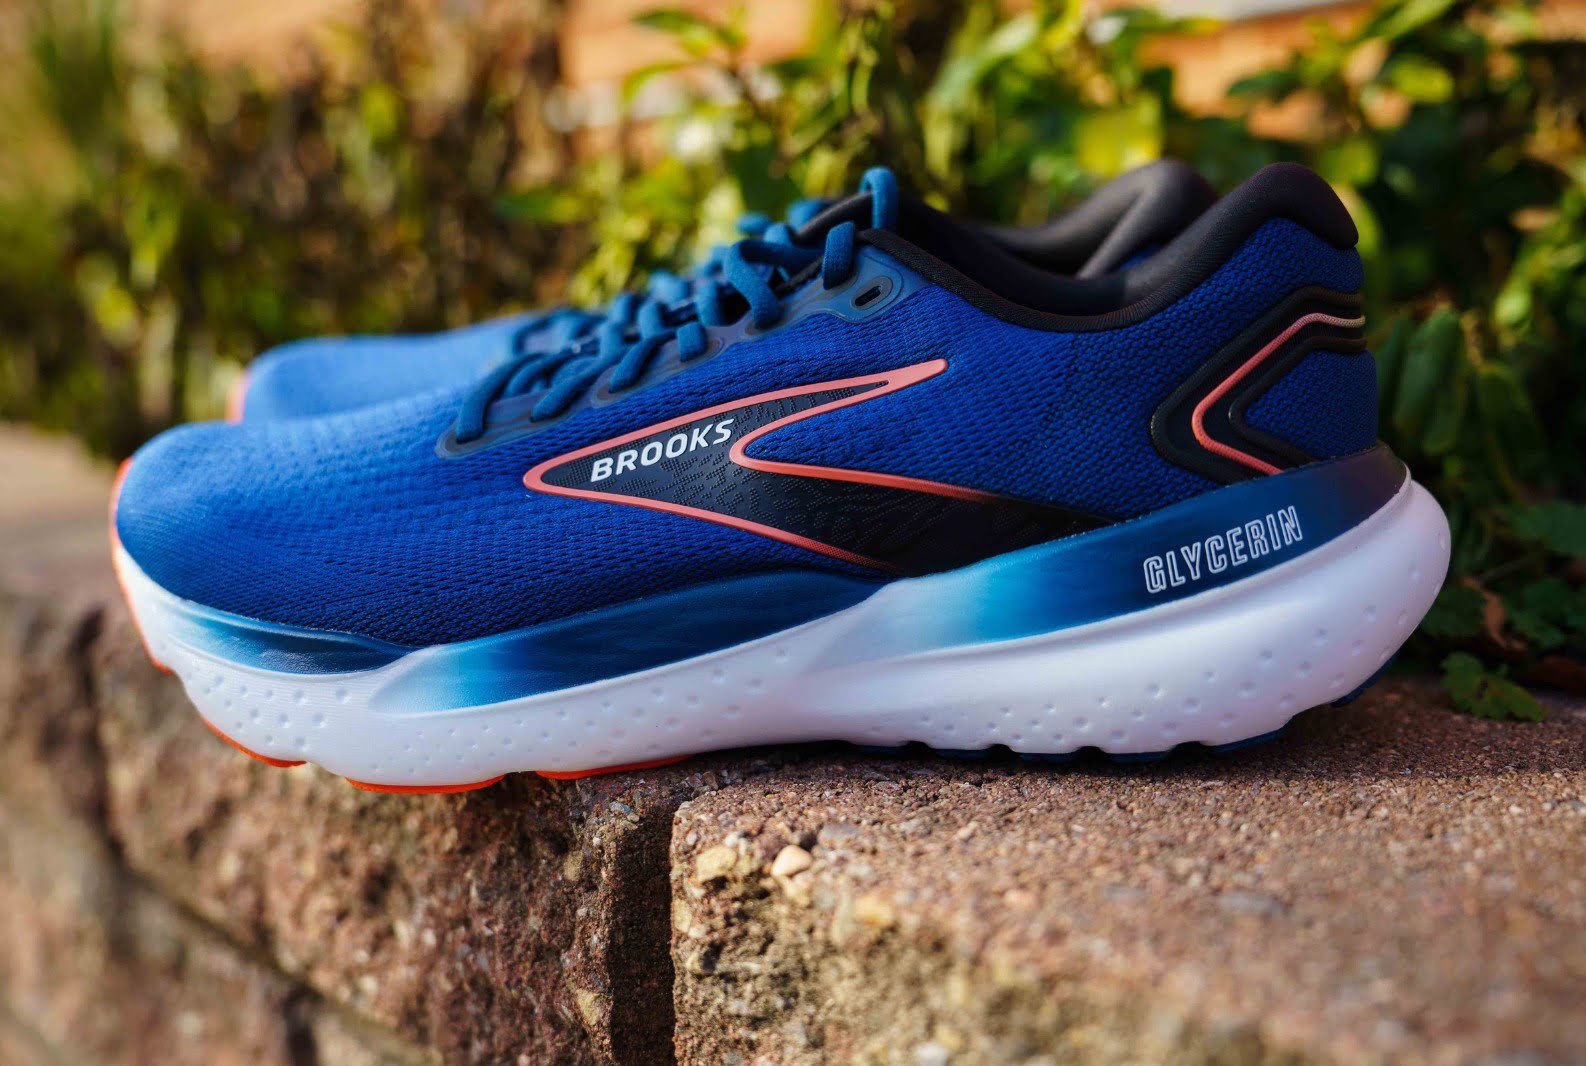 Top Picks: The Best Brooks Running Shoes For Optimal Performance